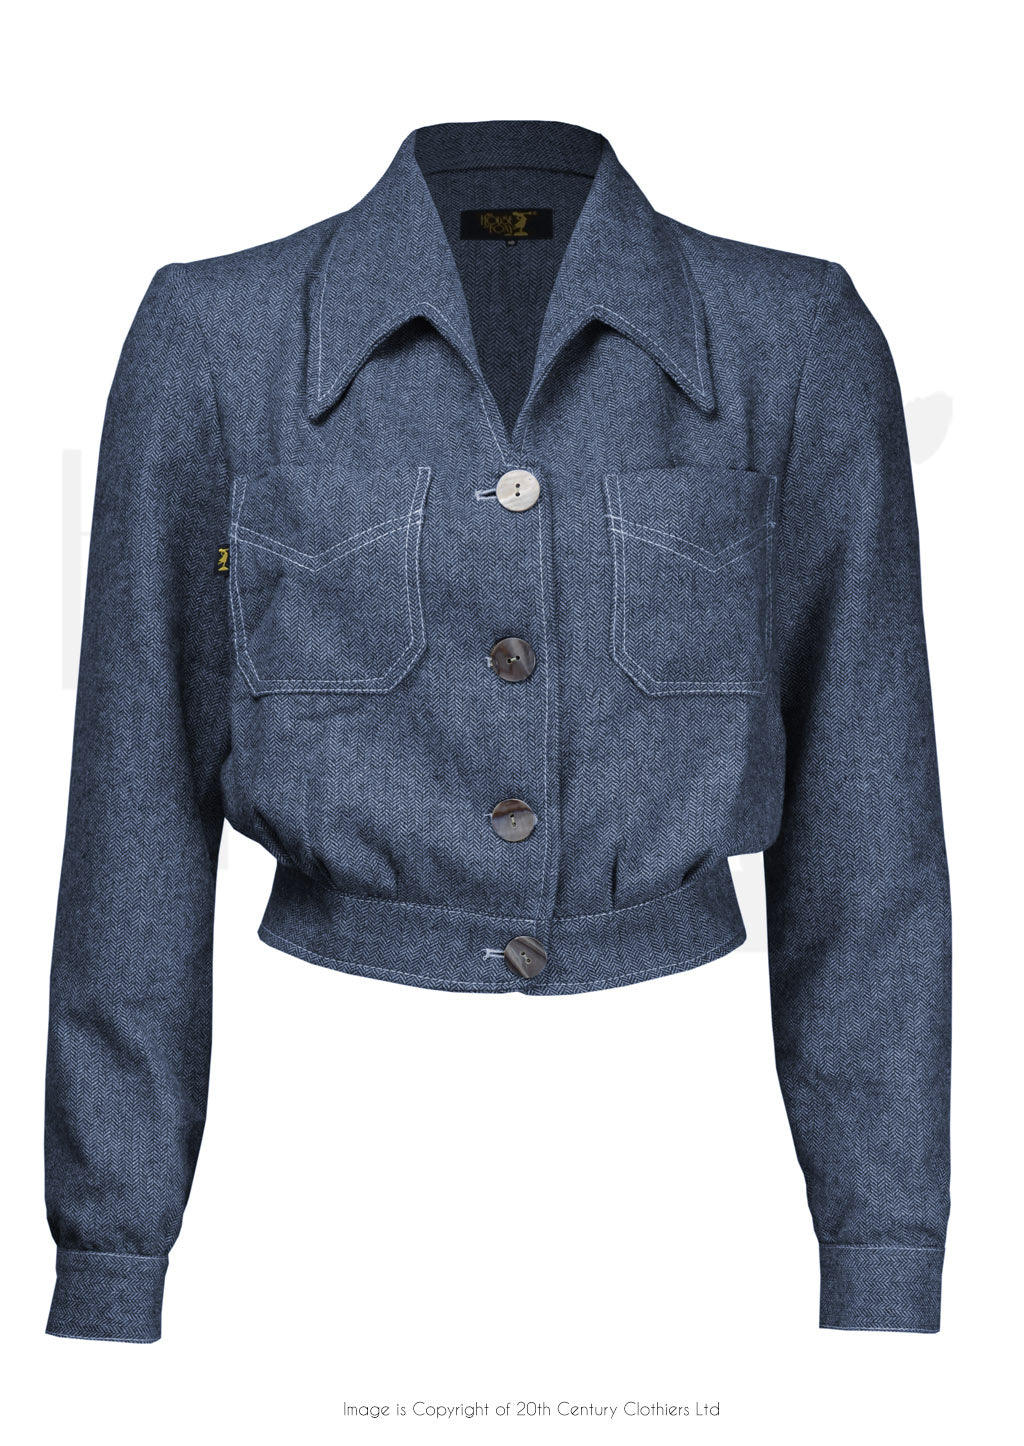 House of Foxy 1940’s Americana Jacket in Blue